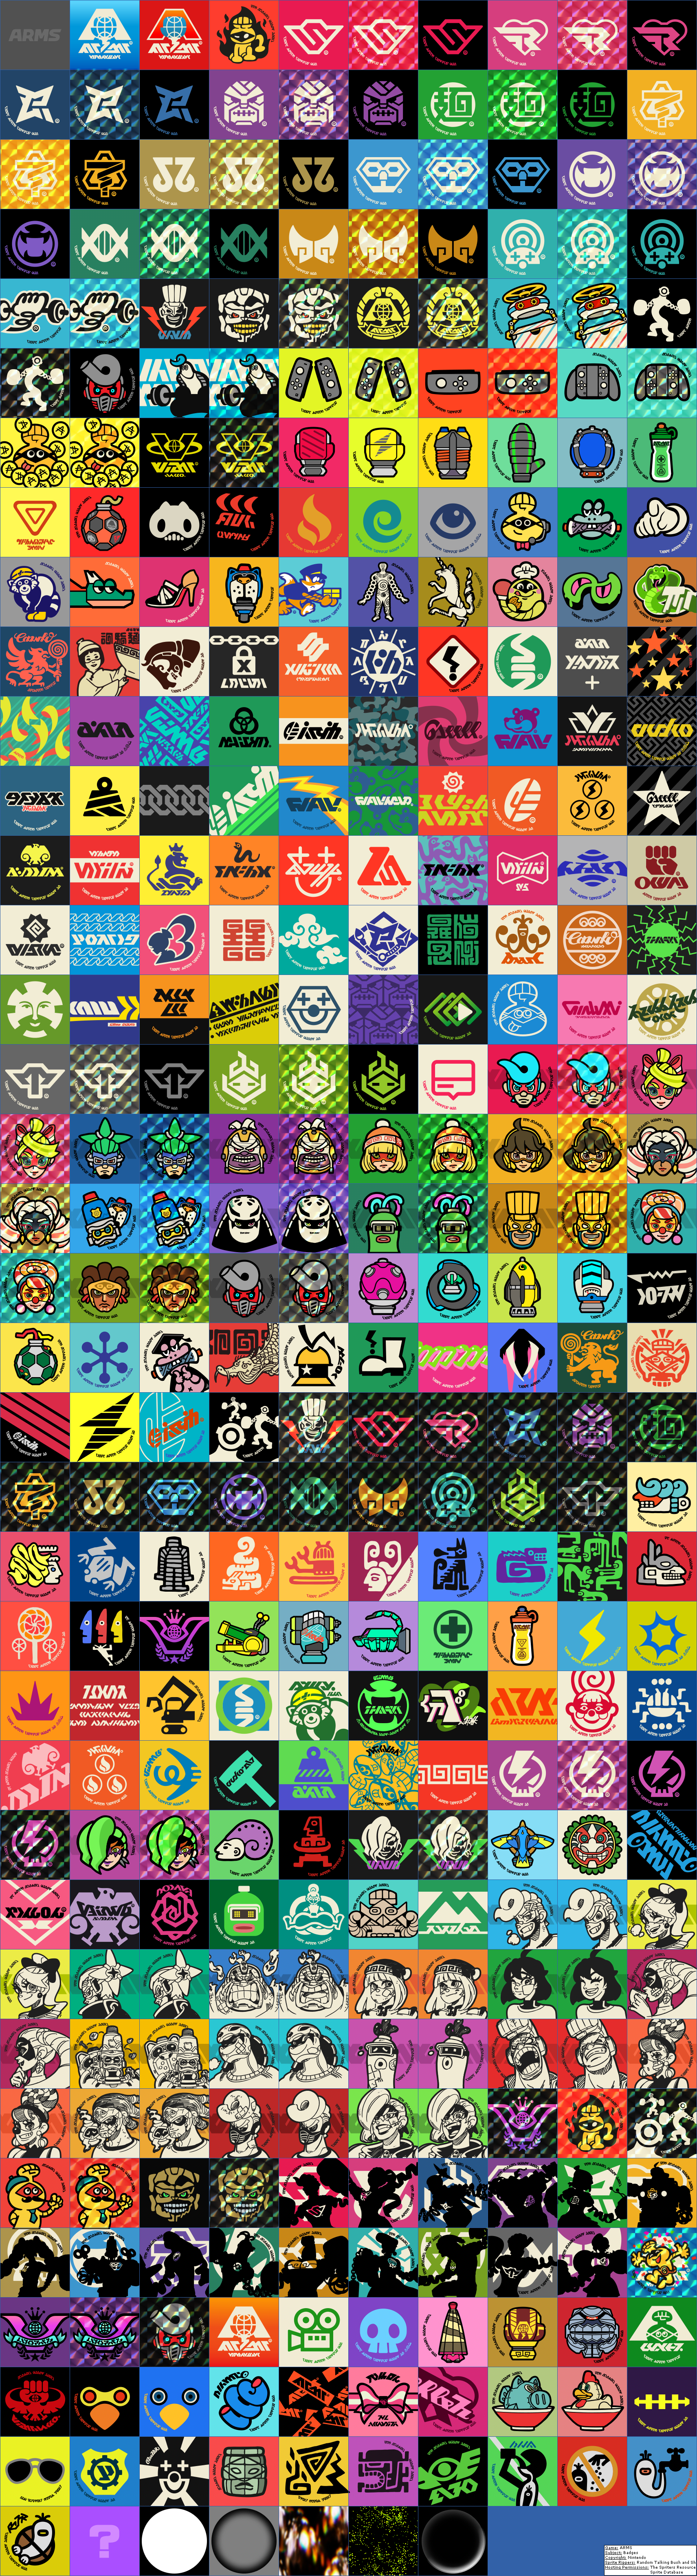 ARMS - Badges